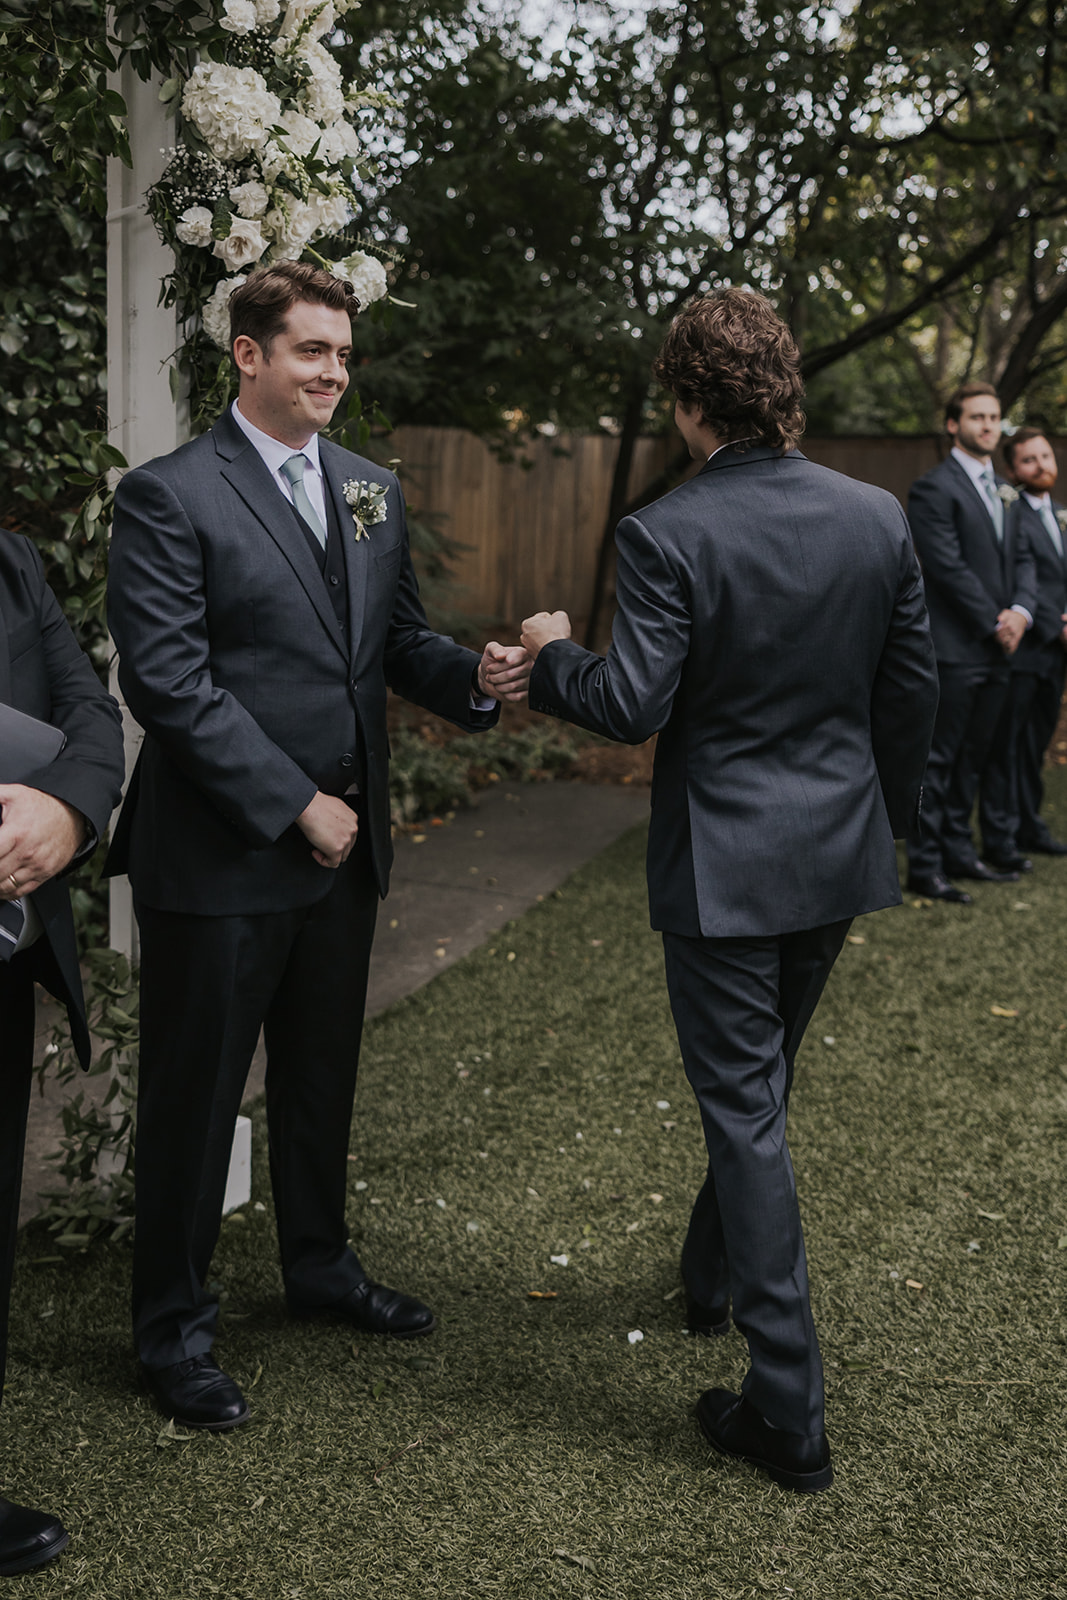 Groom fist bumps a groomsmen as the ceremony is beginning